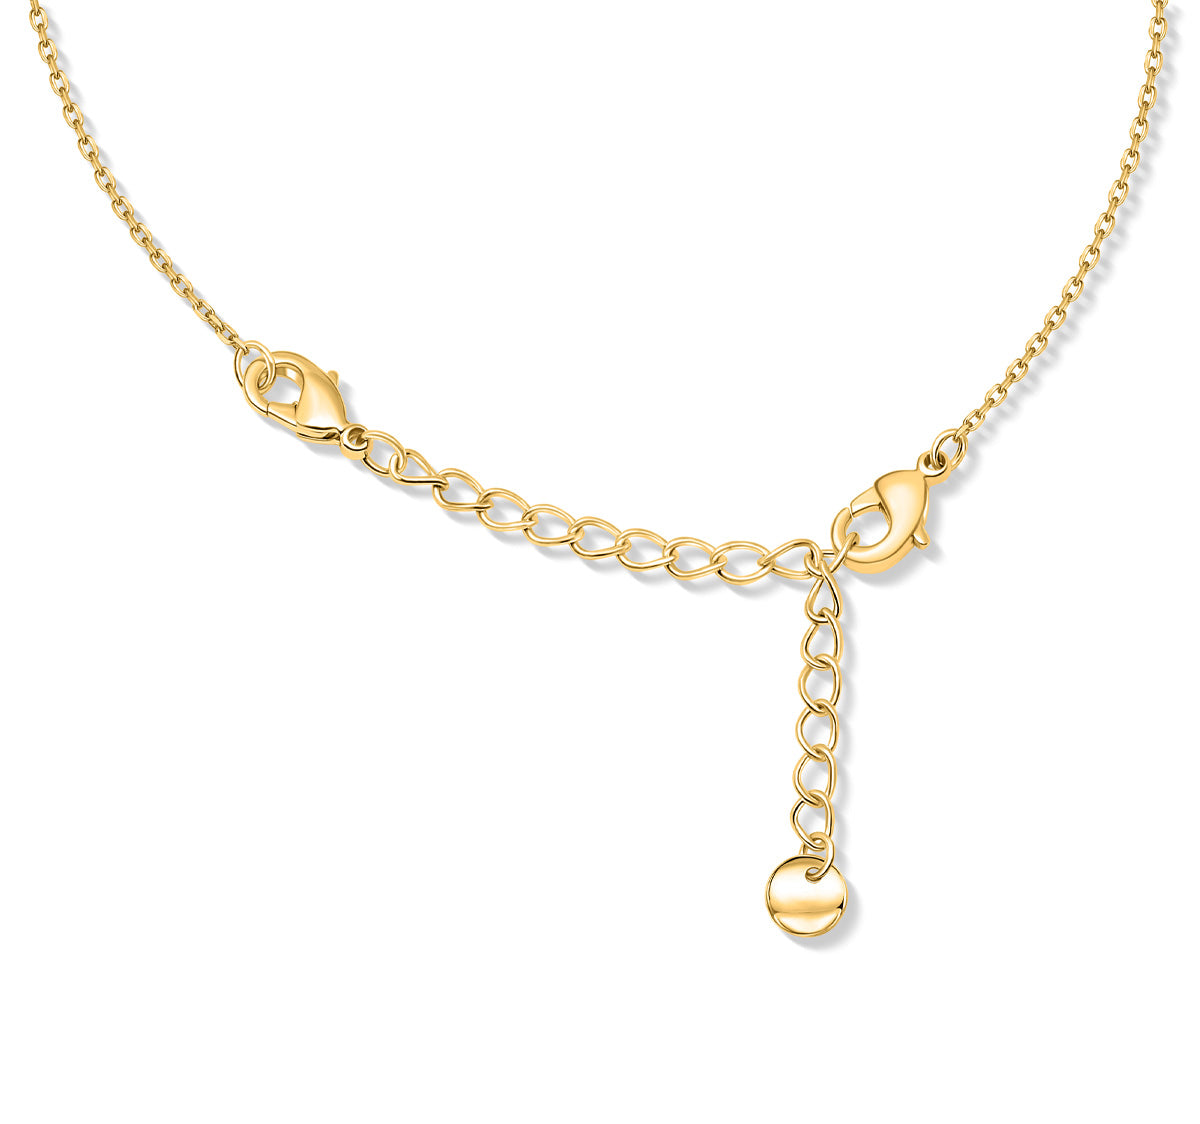 Gold plated necklace extender chain 